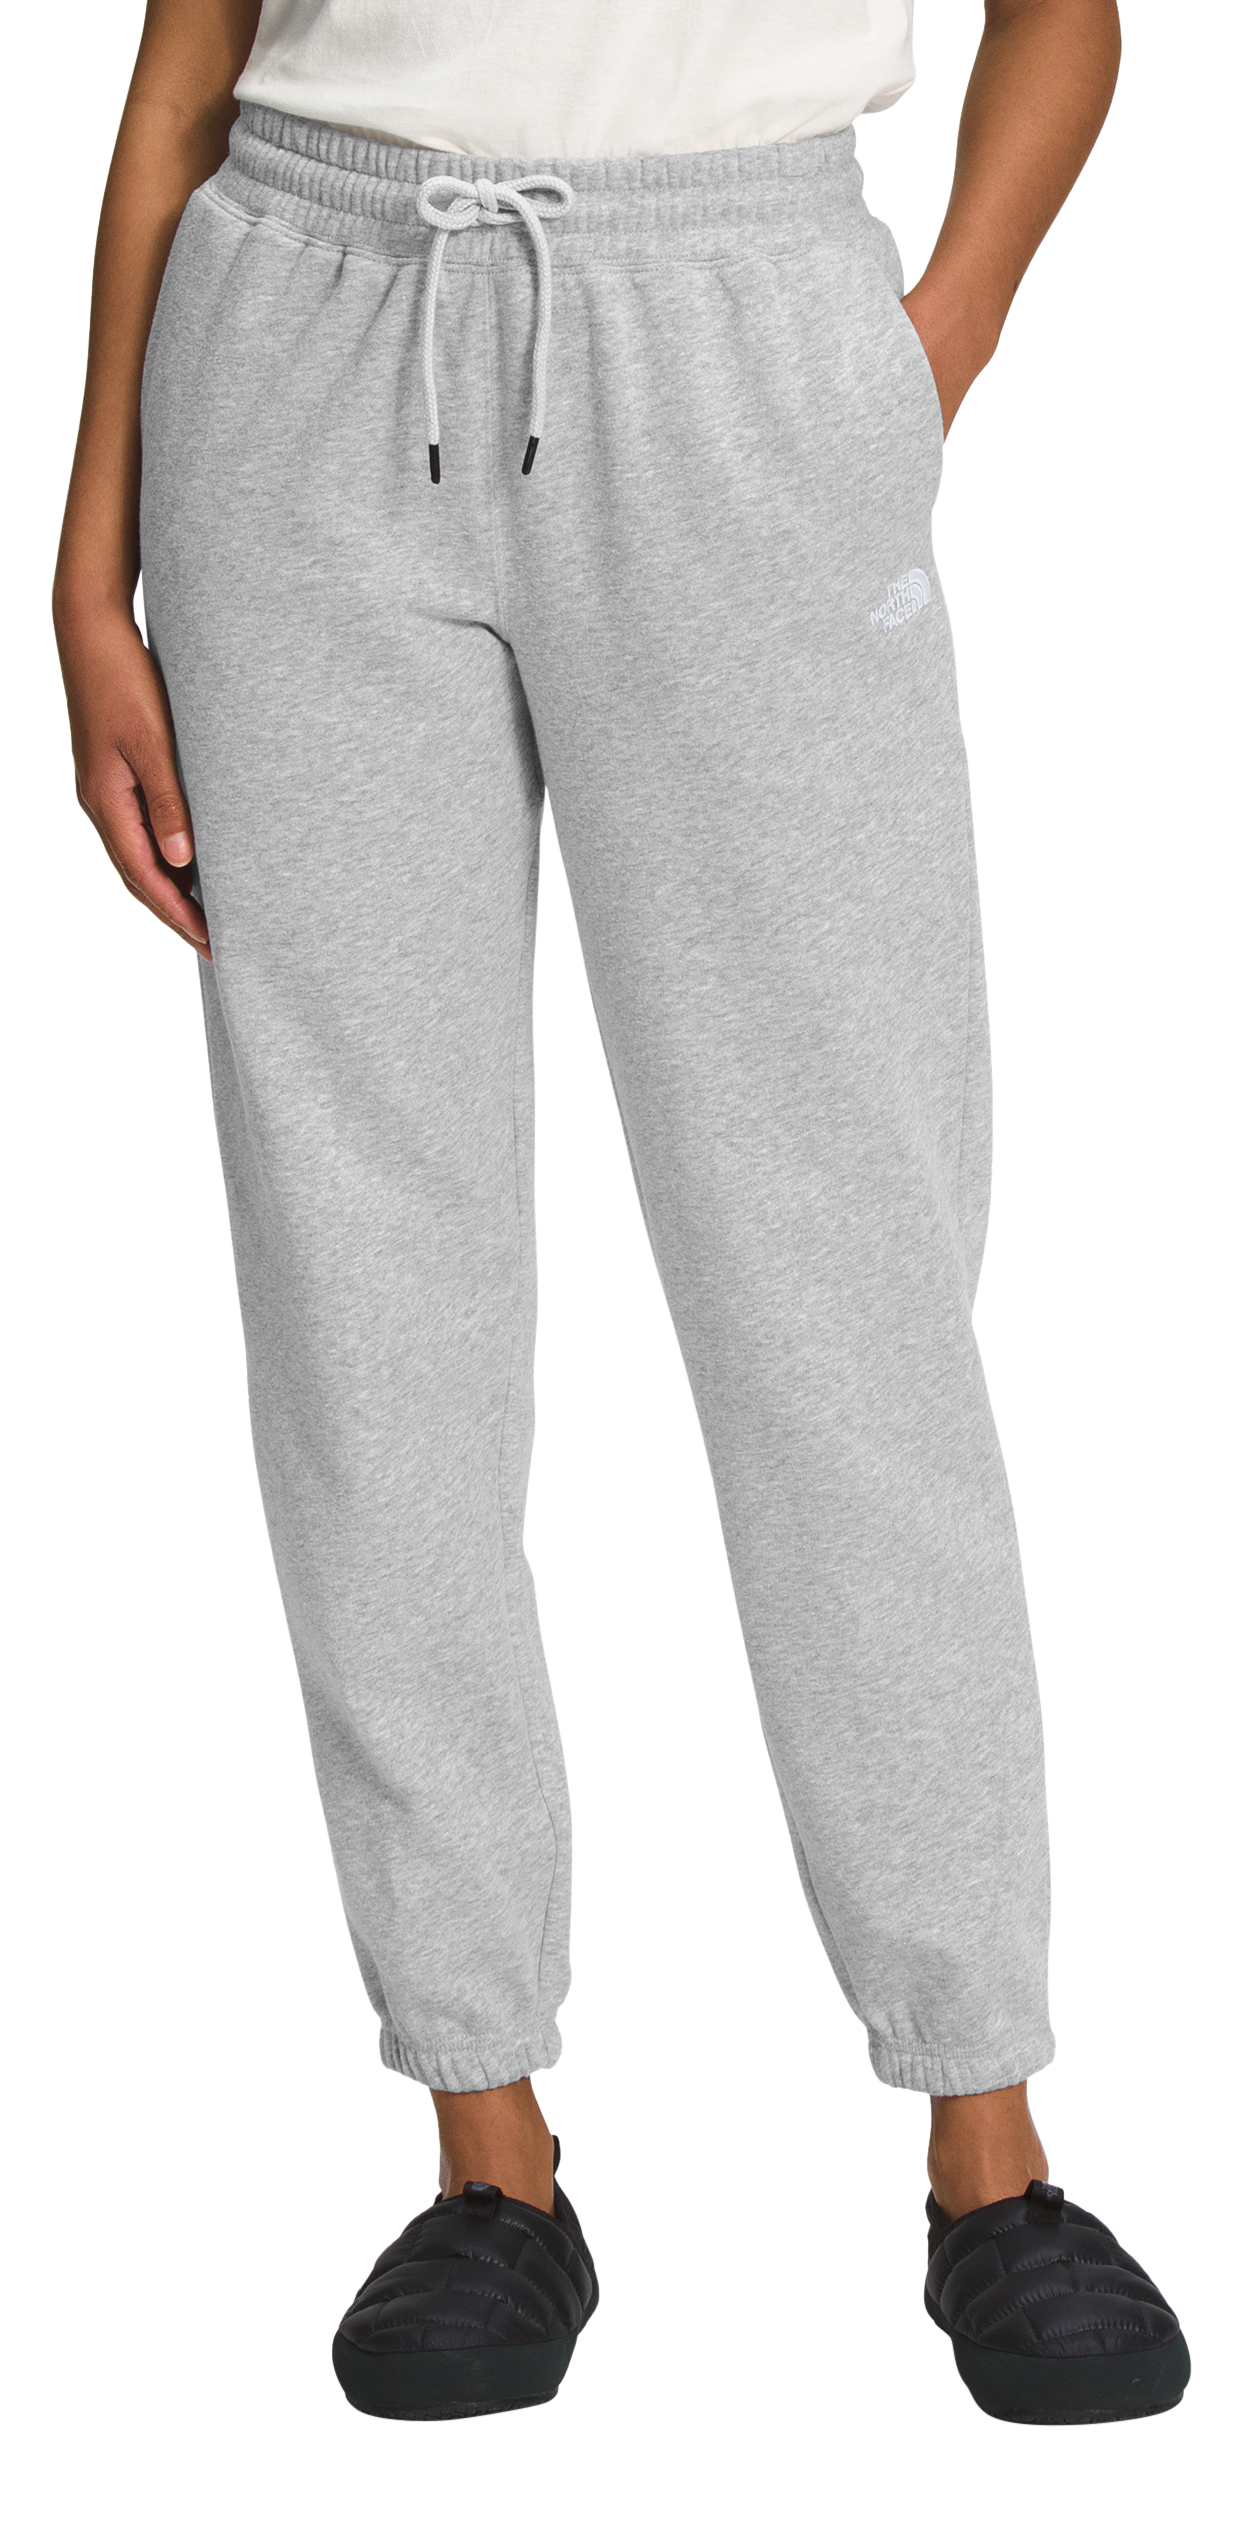 Cherry Blossom Joggers Women's Recycled Sweatpants With All-over